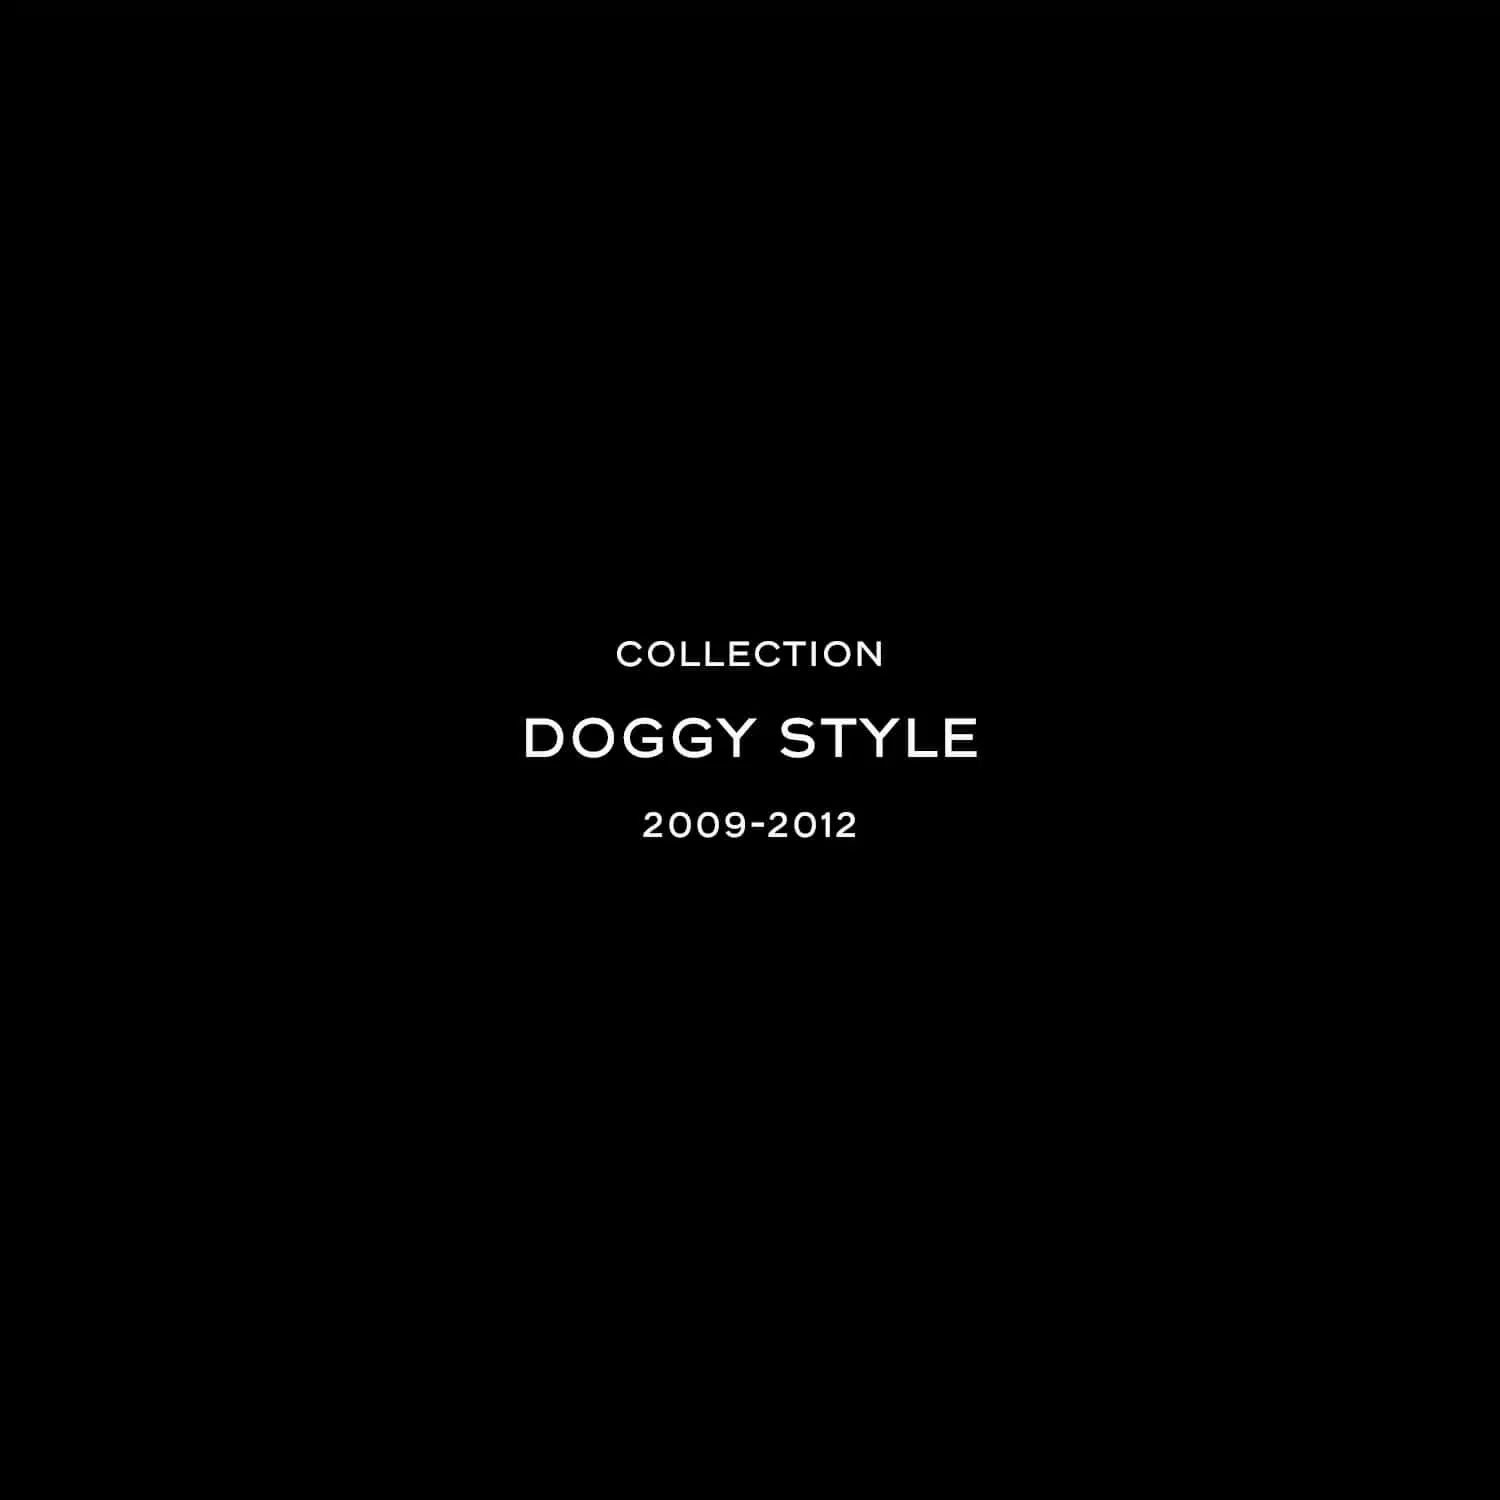 Doggy style collection